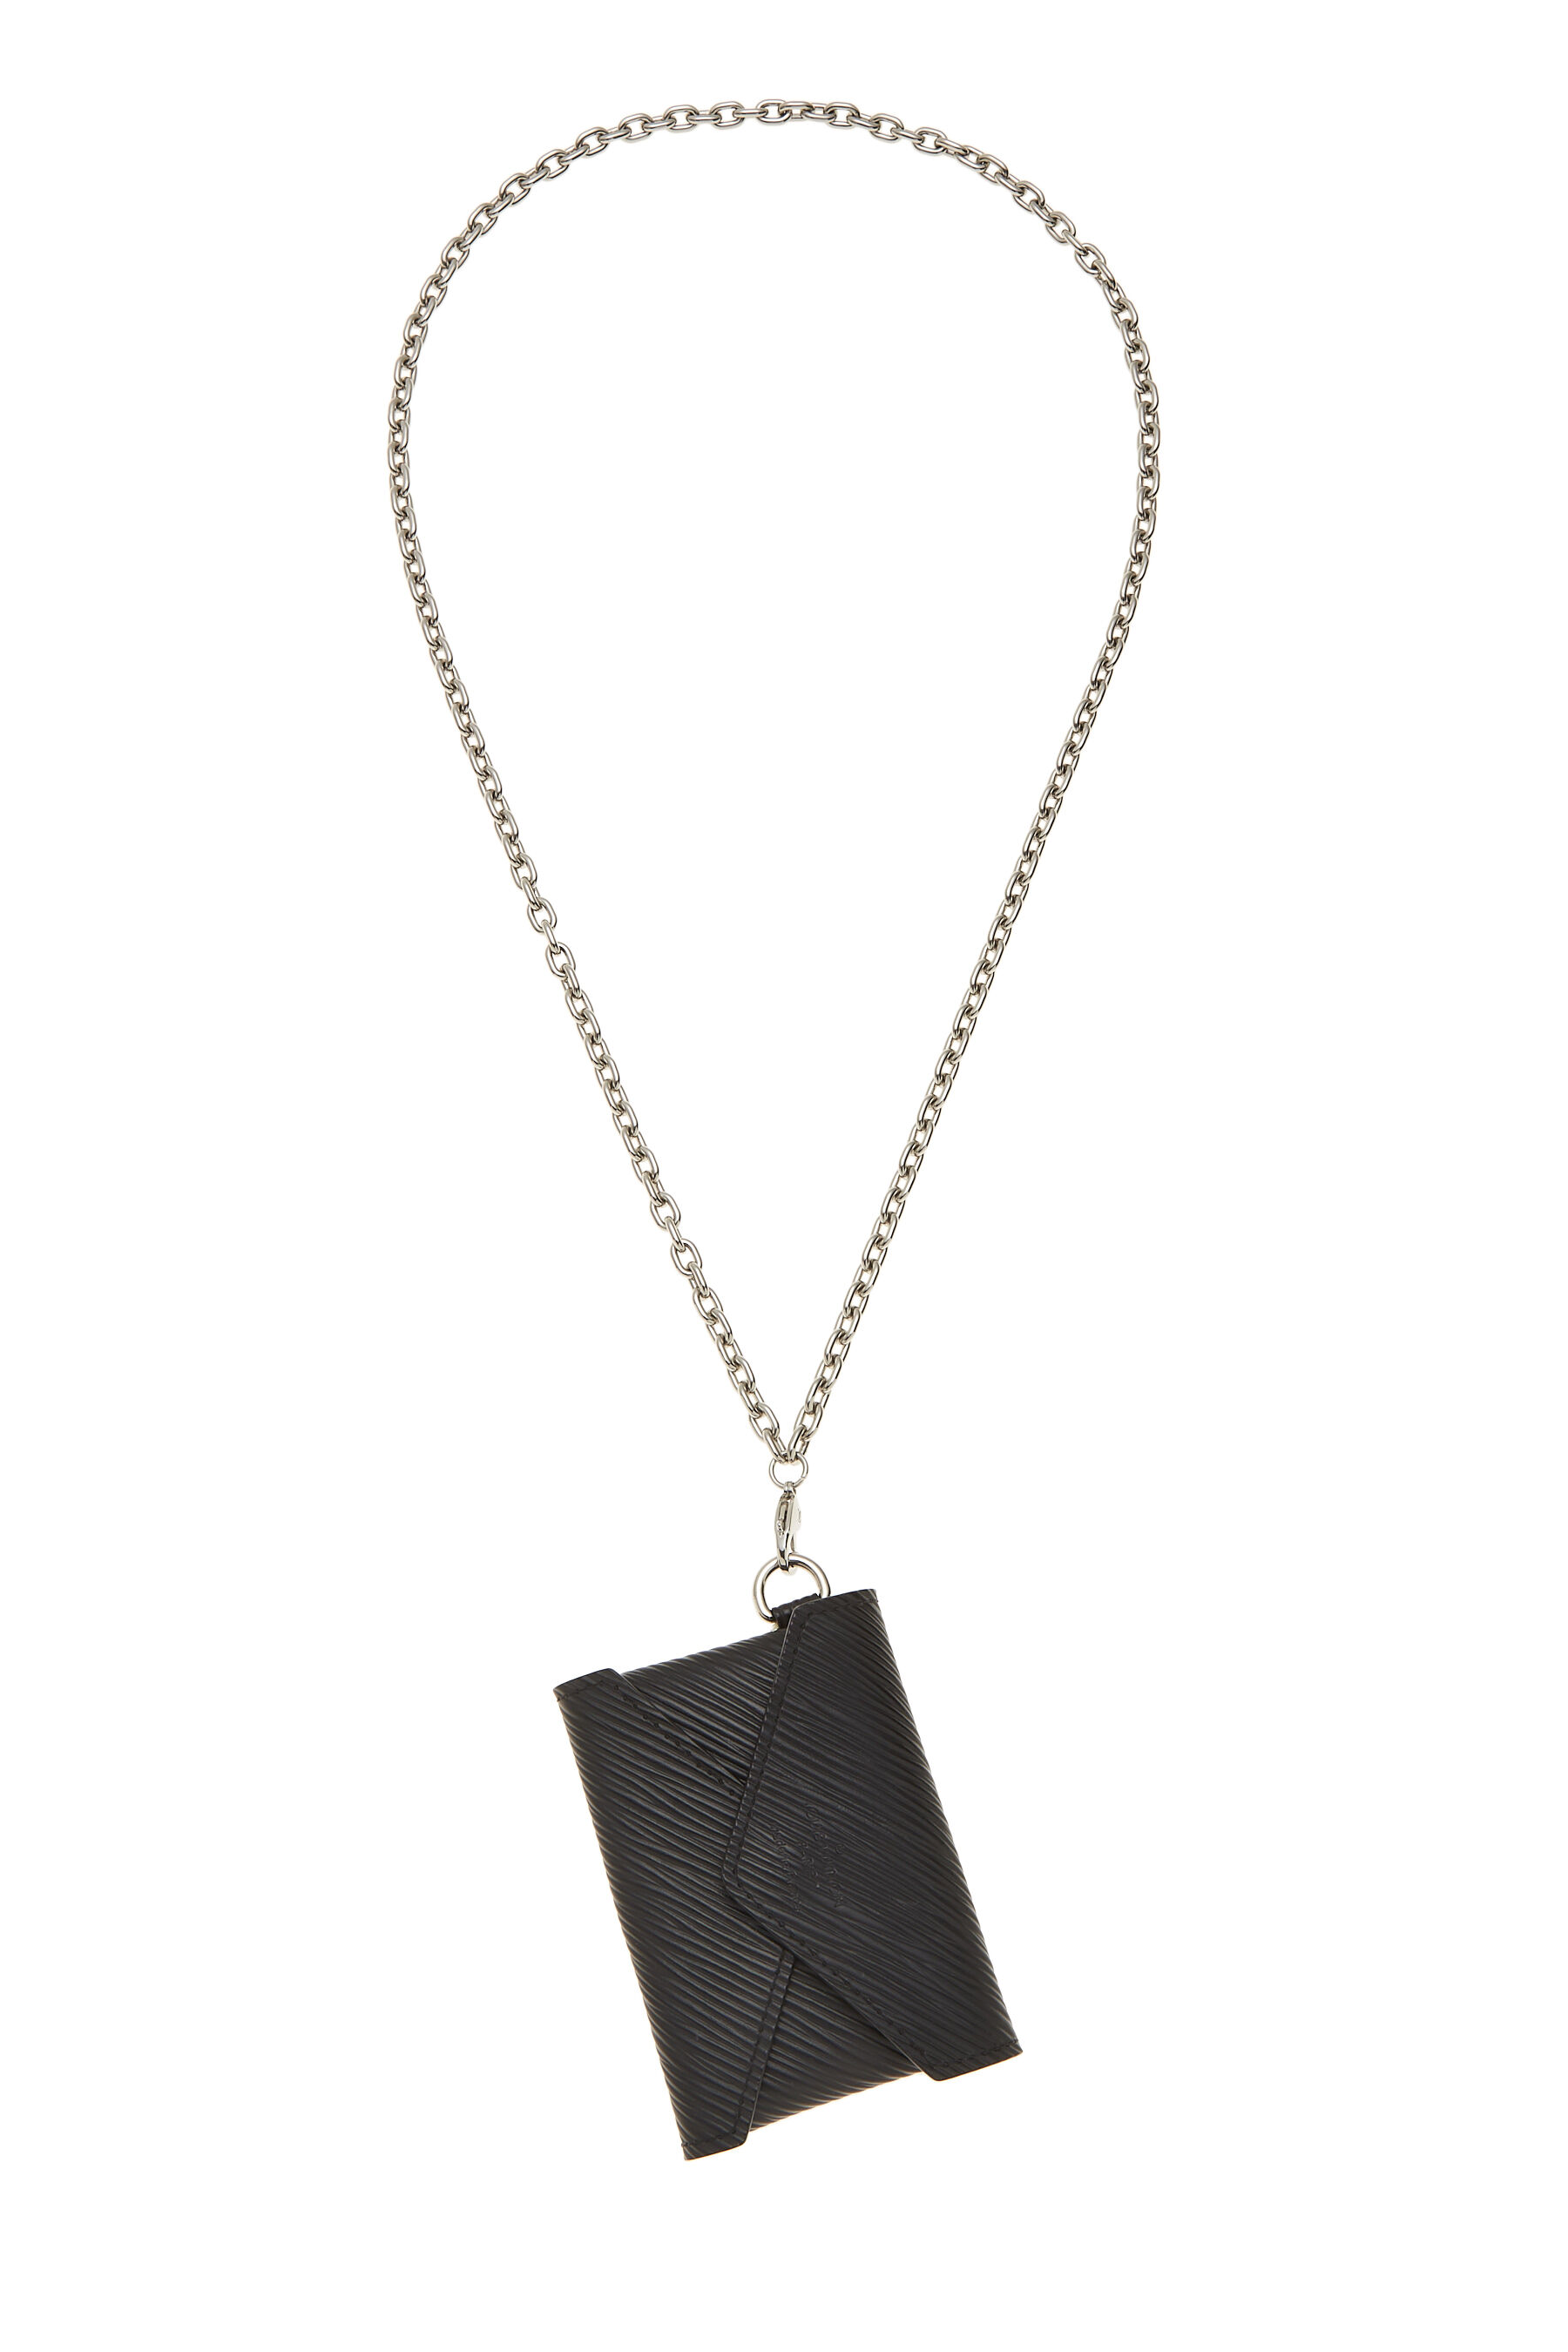 Products By Louis Vuitton : Kirigami Necklace